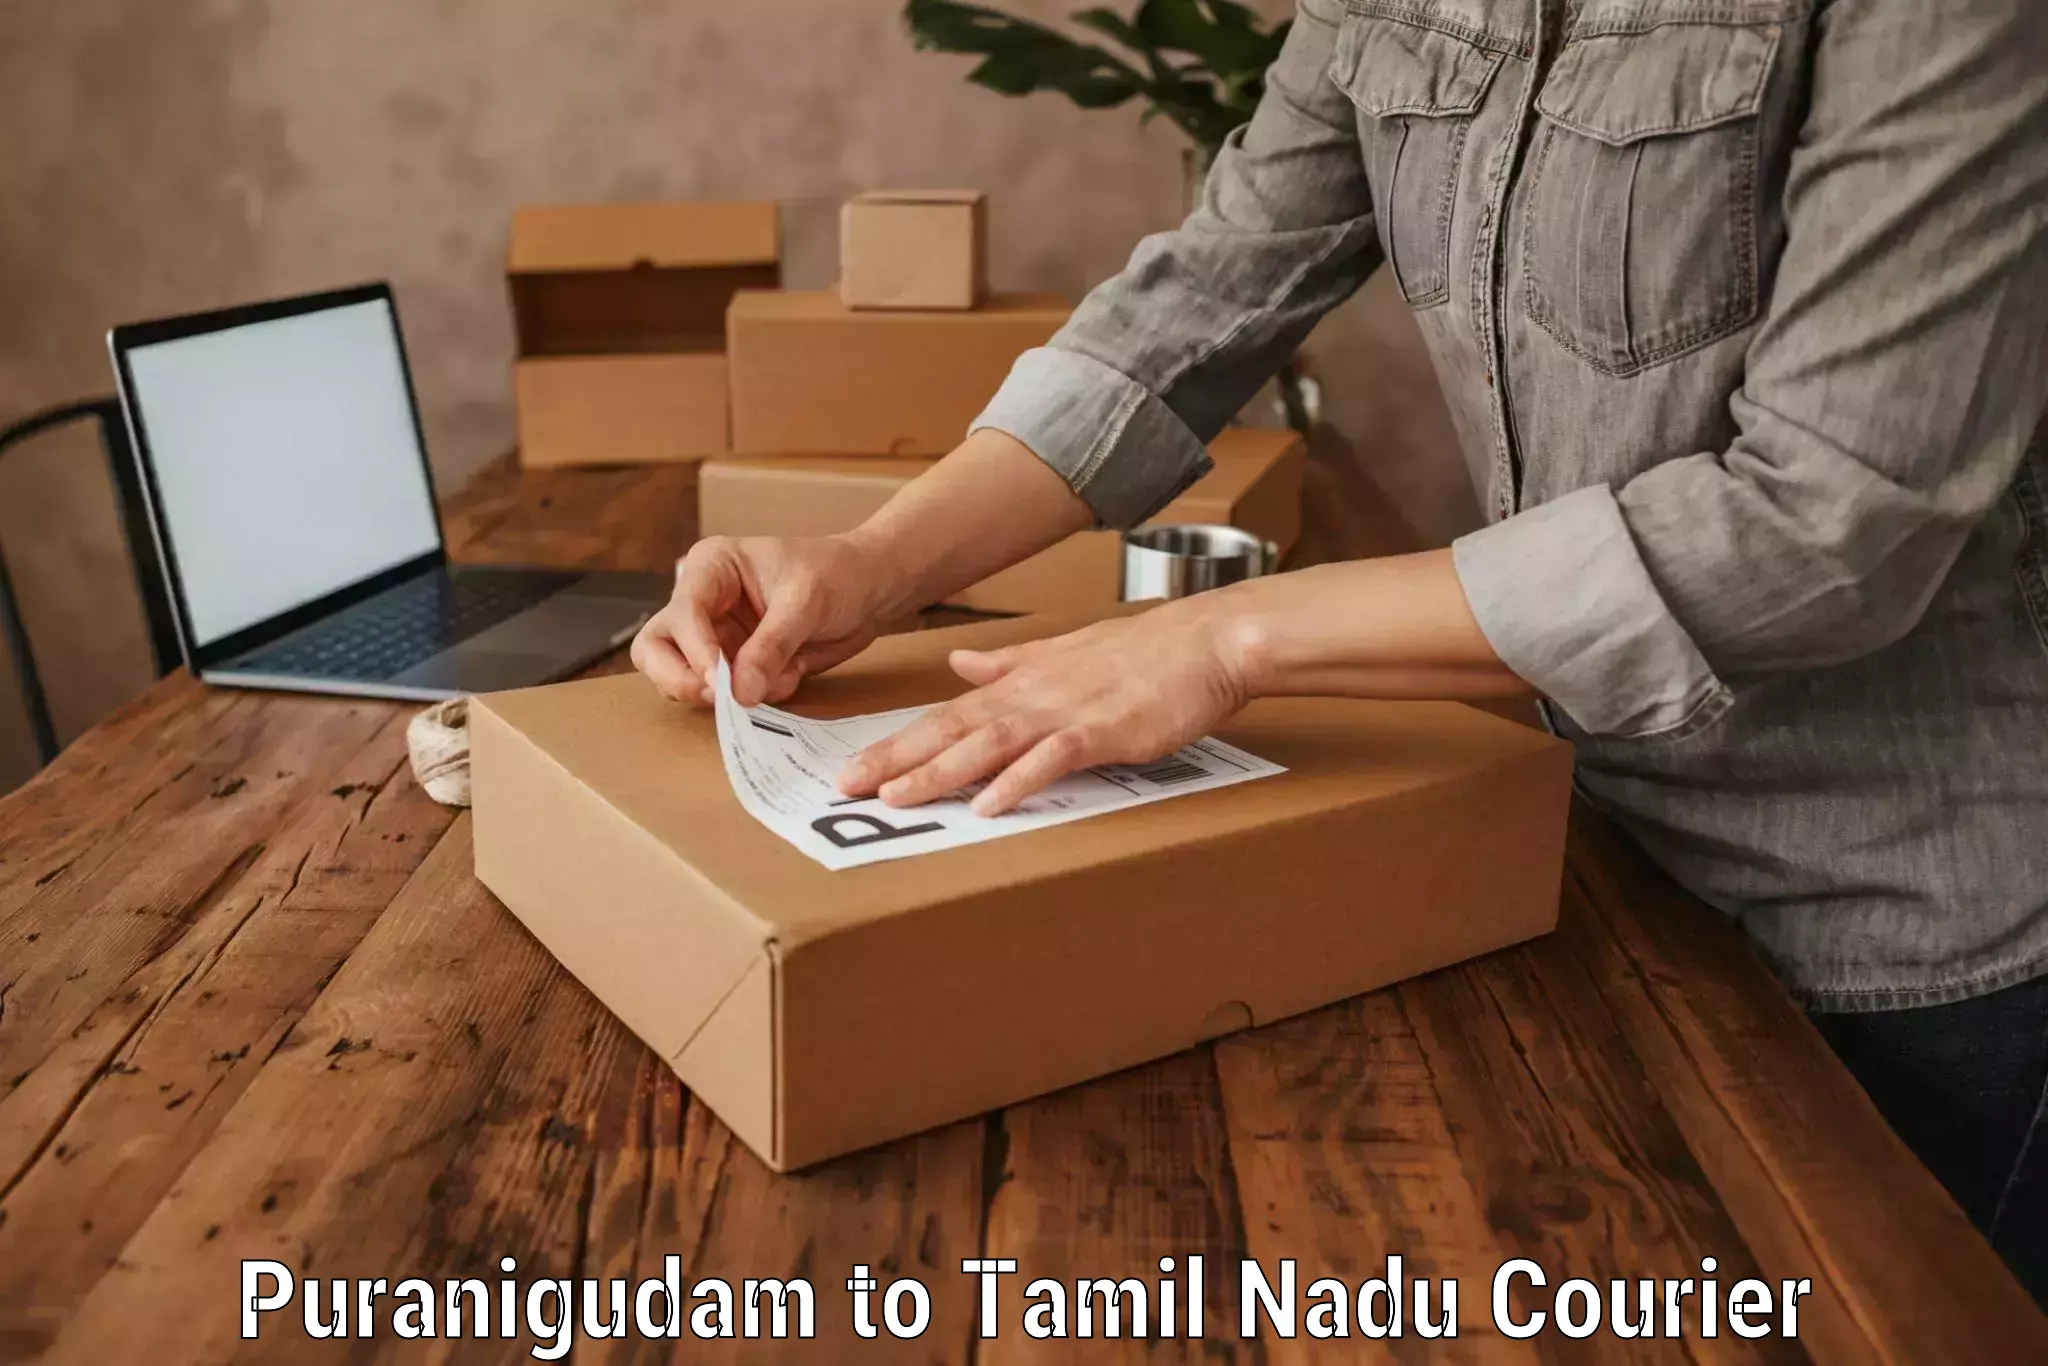 Affordable luggage shipping Puranigudam to Vellore Institute of Technology